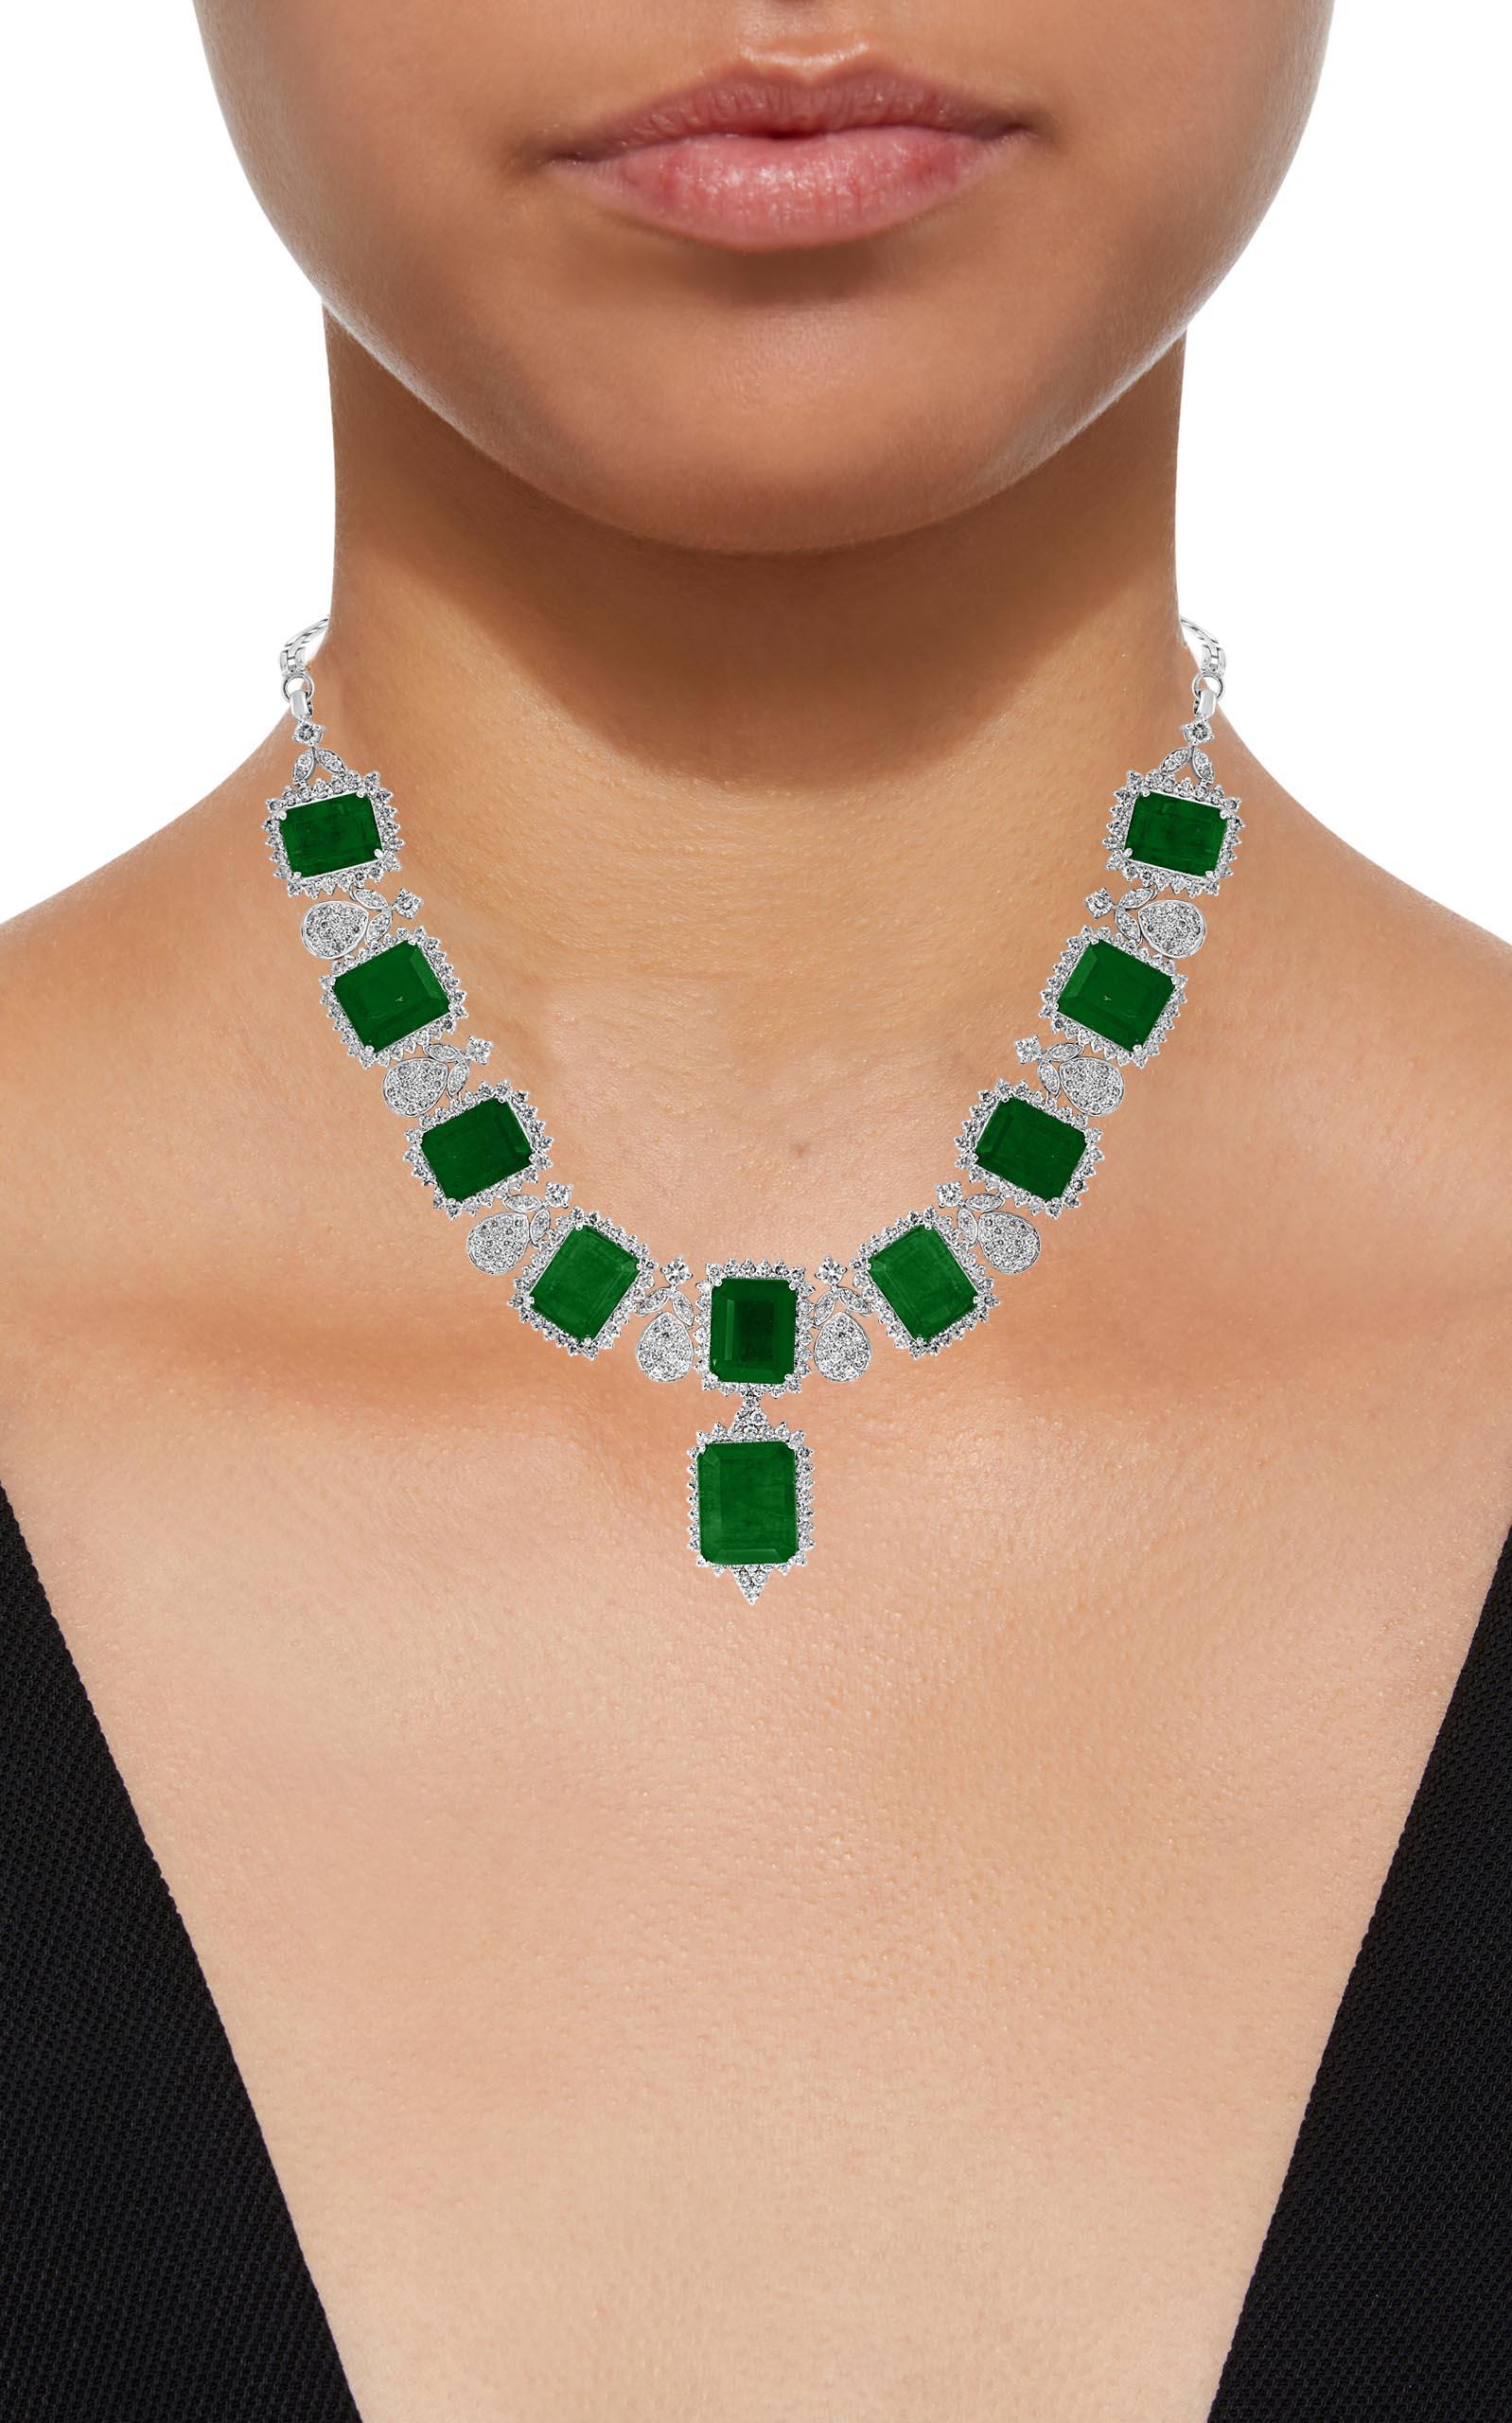 GIA Certified 135 Ct Emerald and 28 Ct Diamond Necklace and Earring Bridal Suite 1